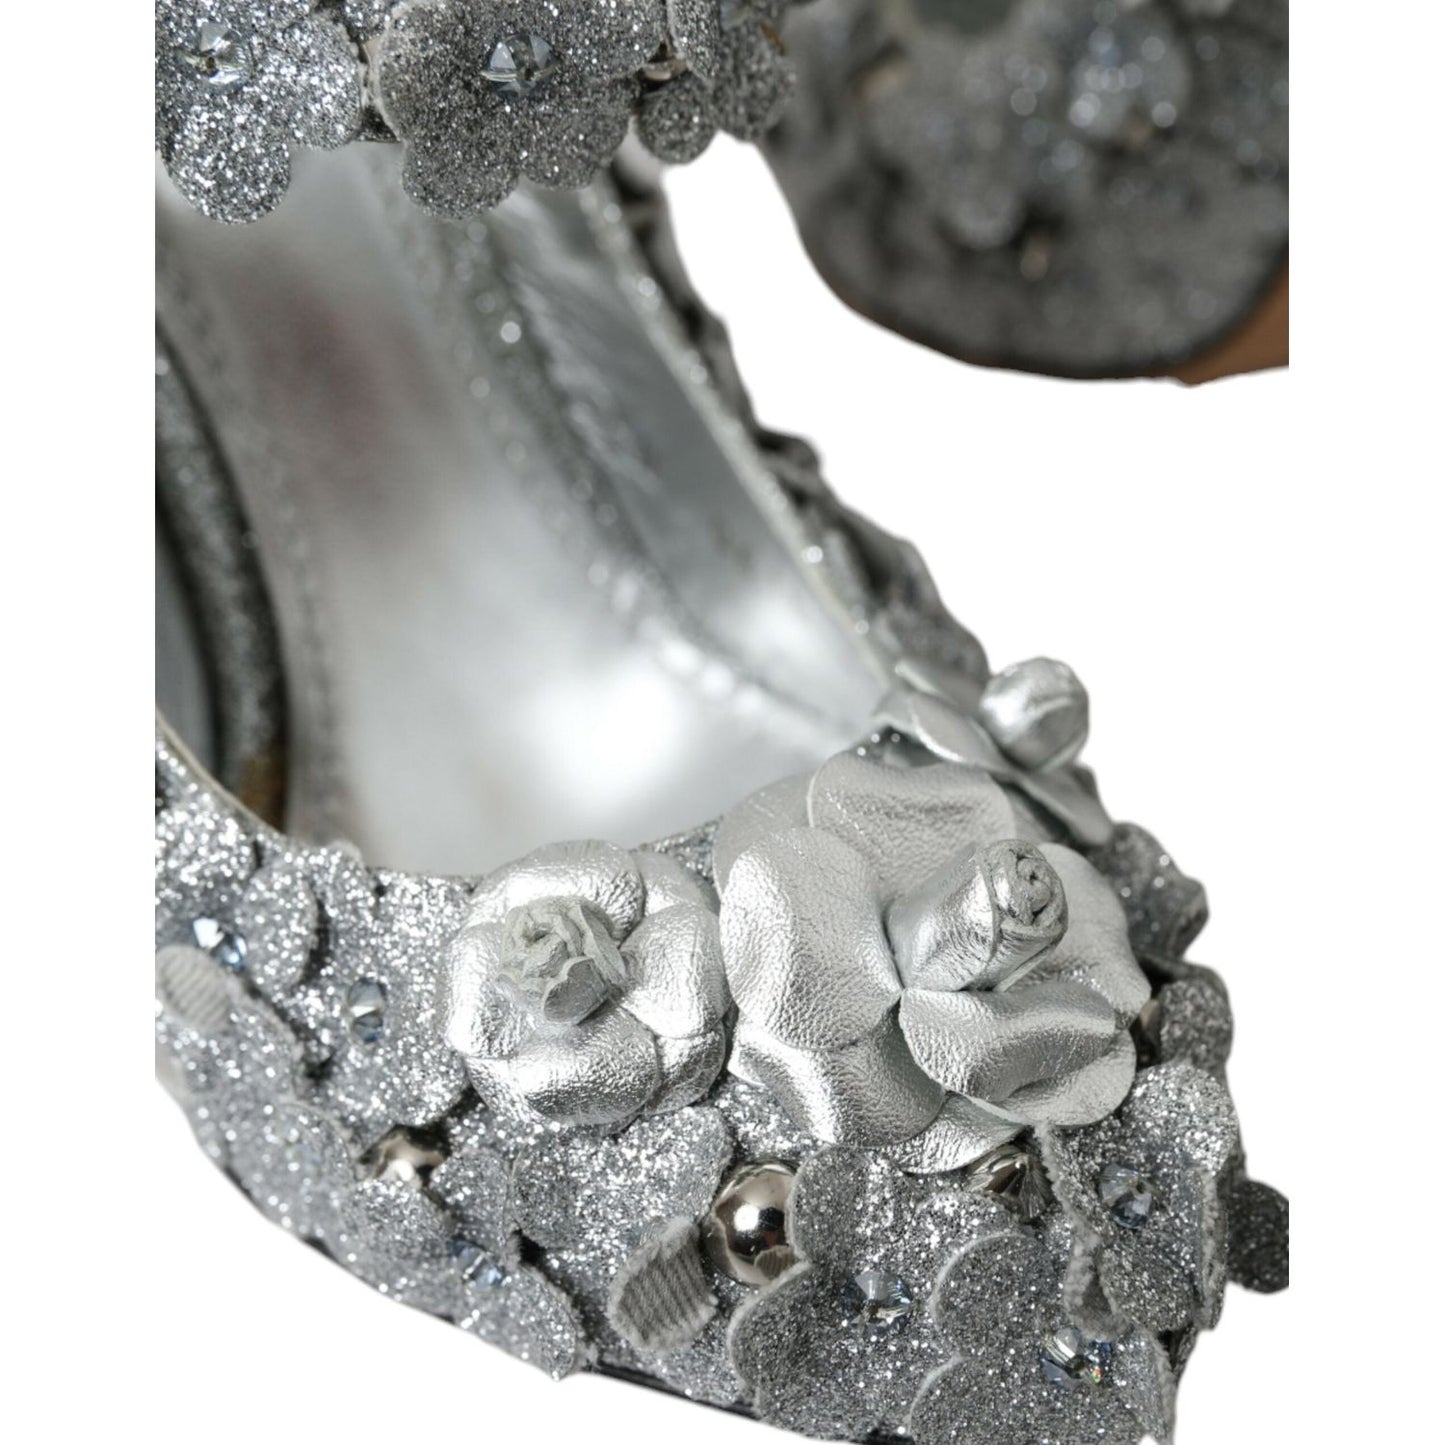 Dolce & Gabbana Silver Floral Crystal Mary Jane Pumps Shoes silver-floral-crystal-mary-jane-pumps-shoes